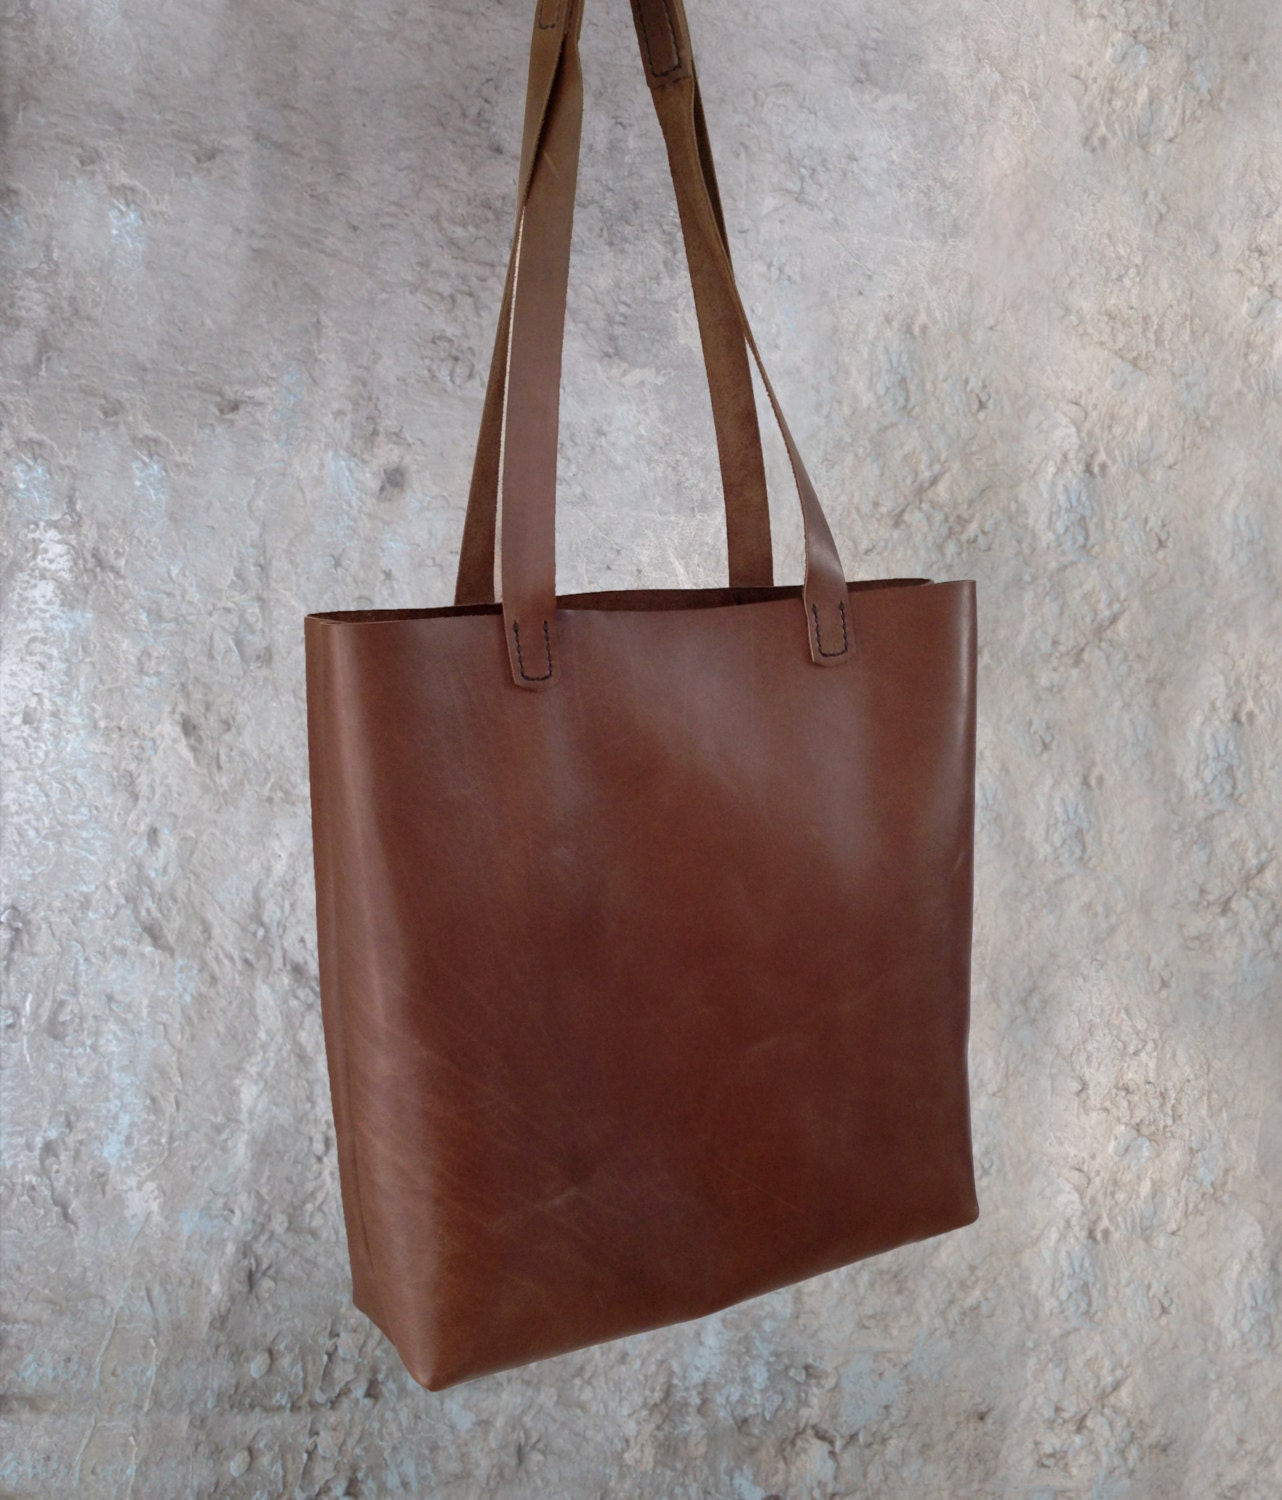 Hand stitch leather tote bag Large shopping tote bag natural